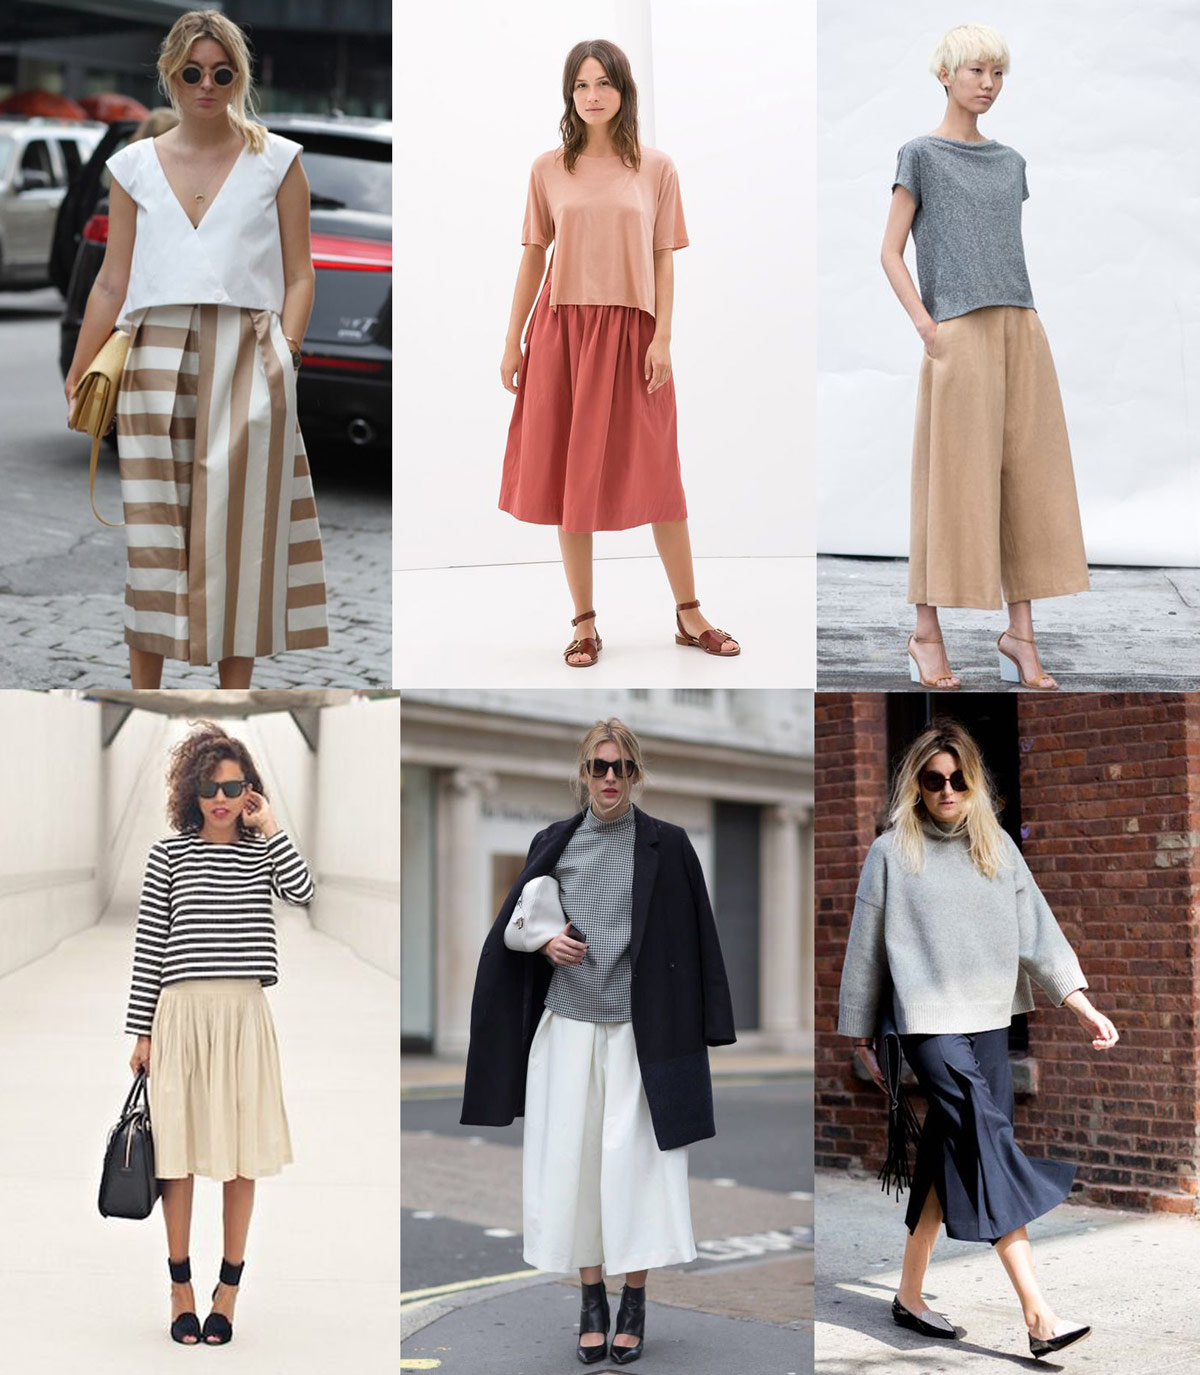 Introducing the Liesl + Co Girl Friday Culottes | Blog | Oliver + S